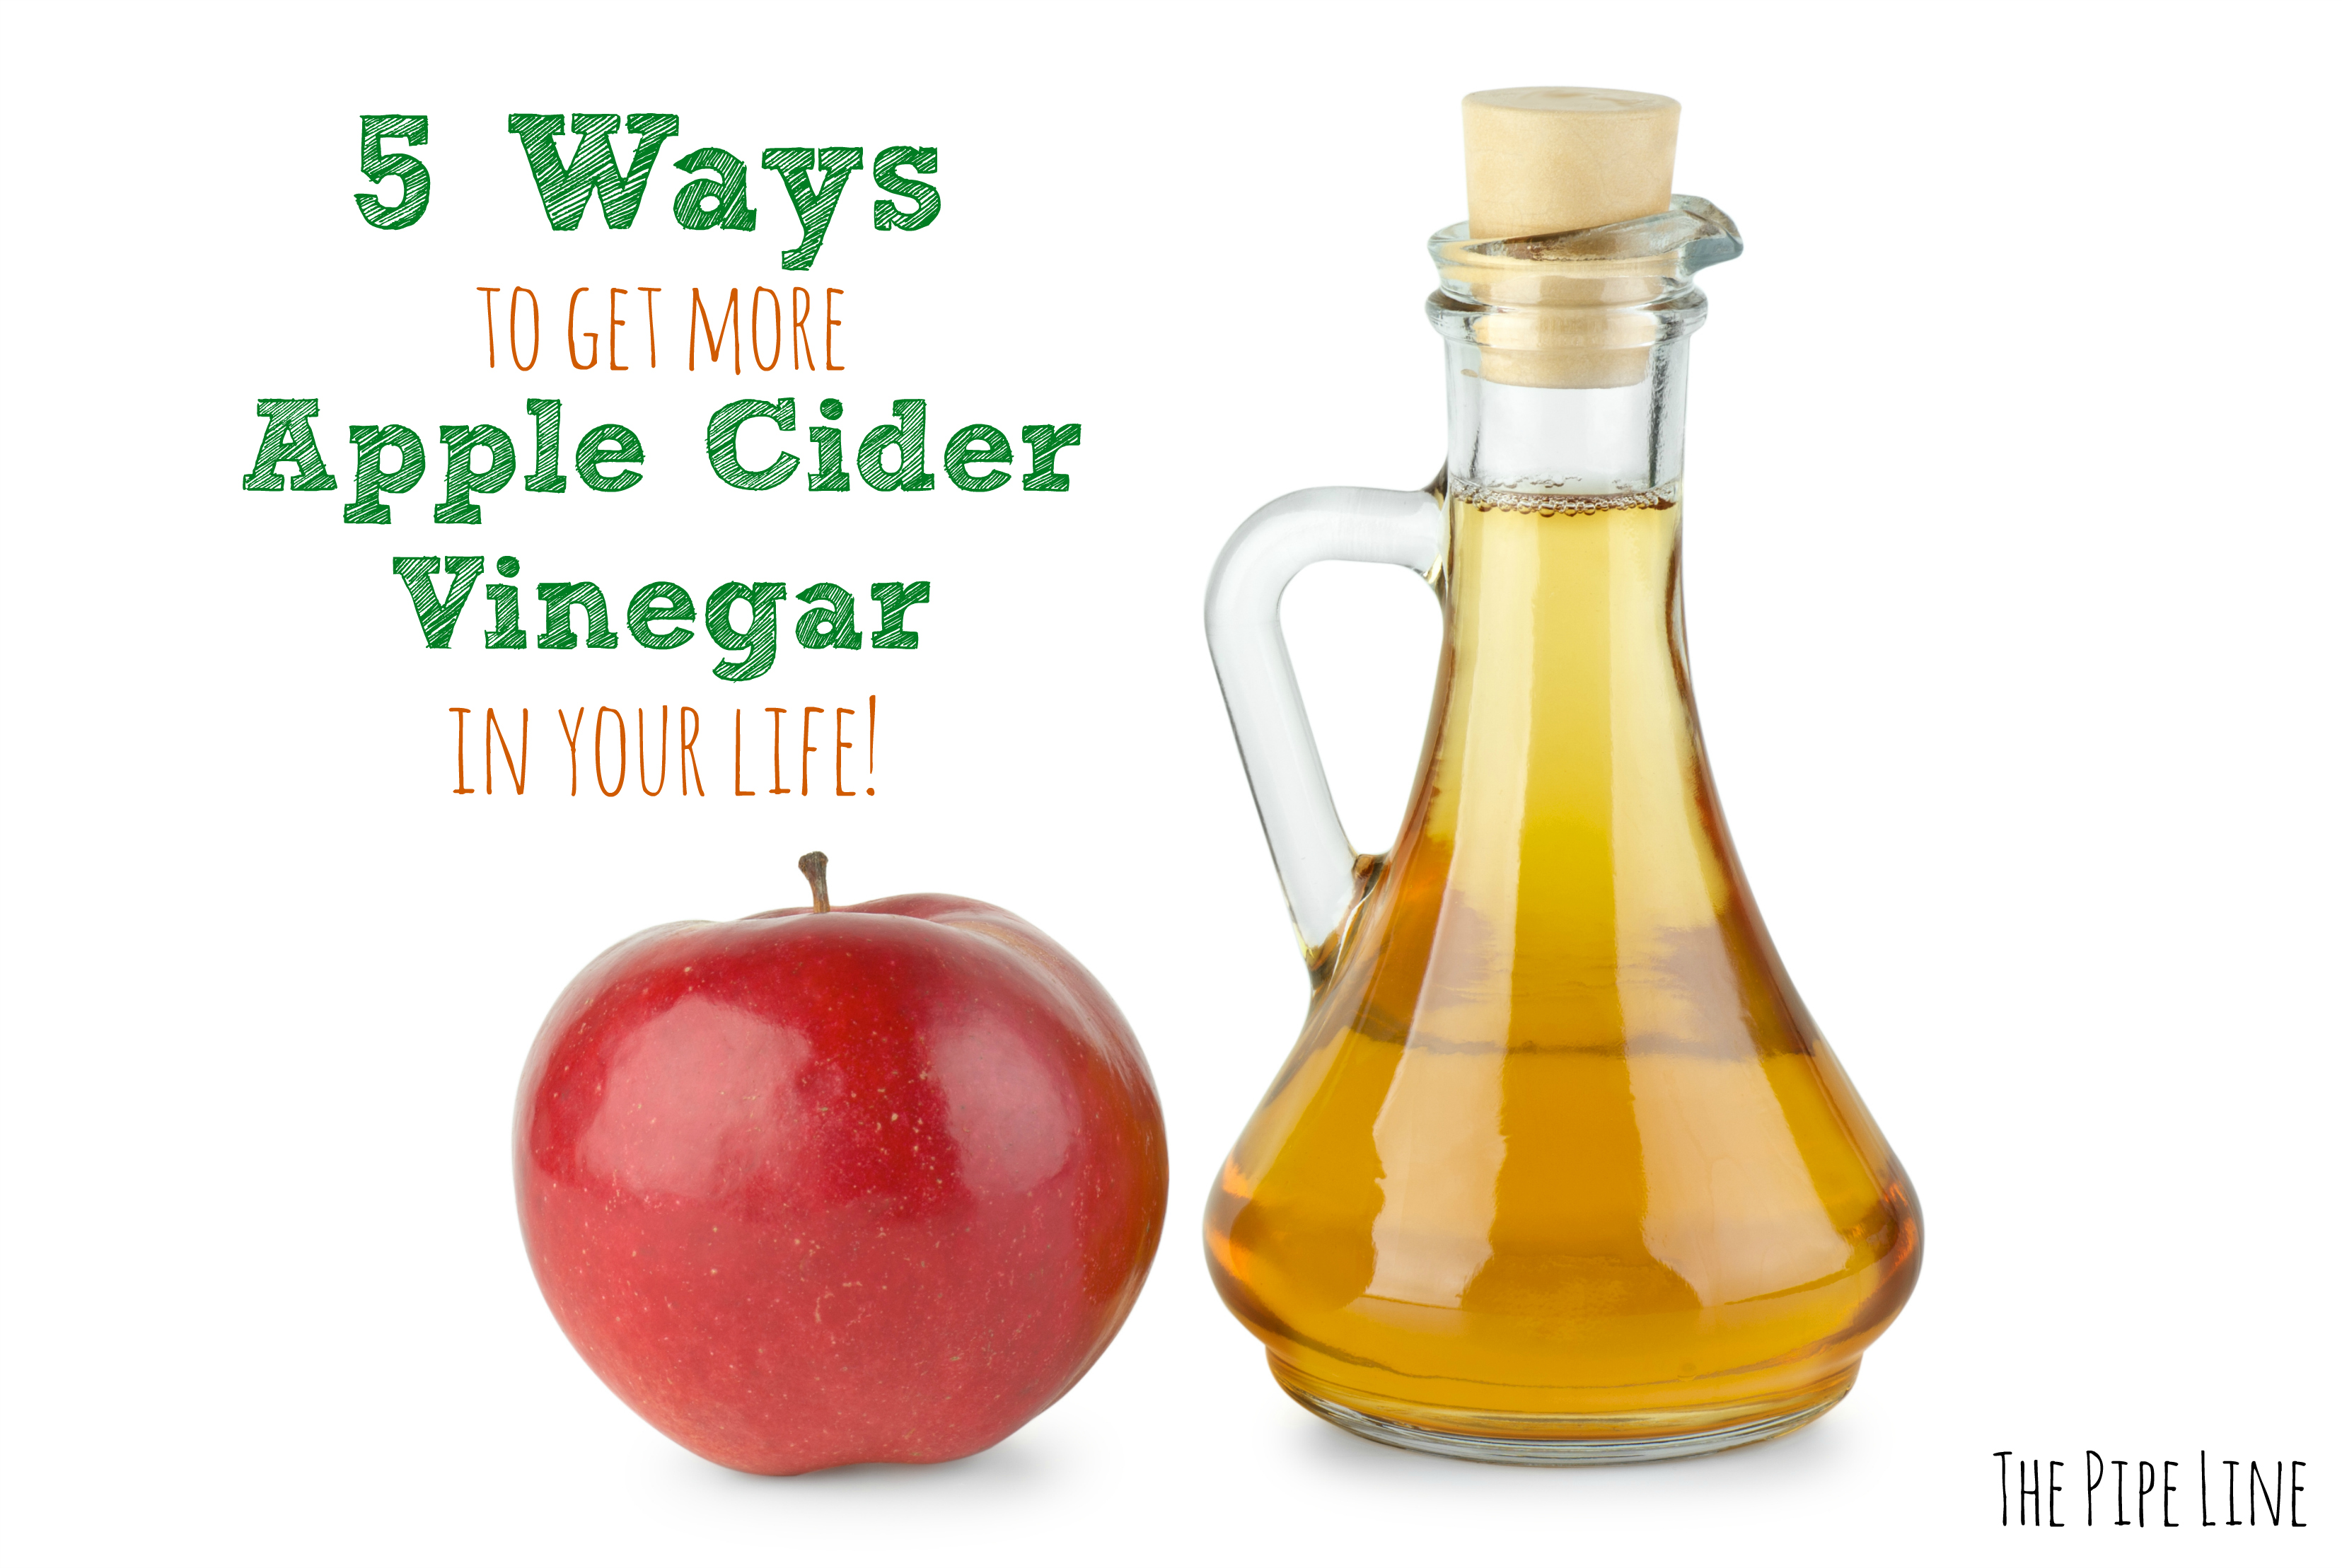 Piping Rock - The Pipe Line - 5 Ways to Get More Apple Cider Vinegar in Your Life